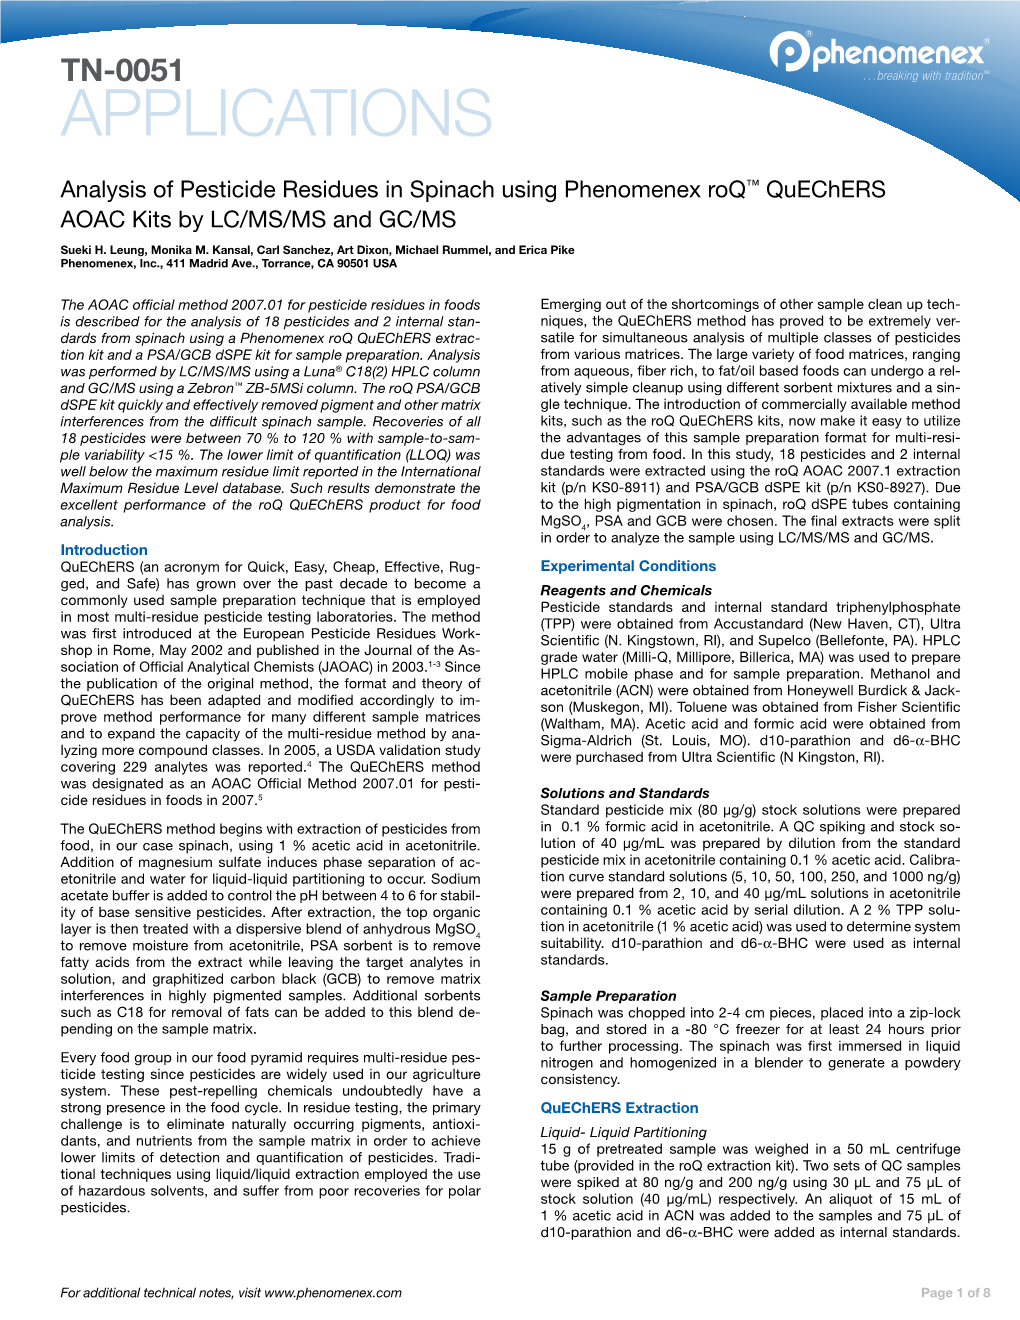 Analysis of Pesticide Residues in Spinach Using Phenomenex Roq™ Quechers AOAC Kits by LC/MS/MS and GC/MS